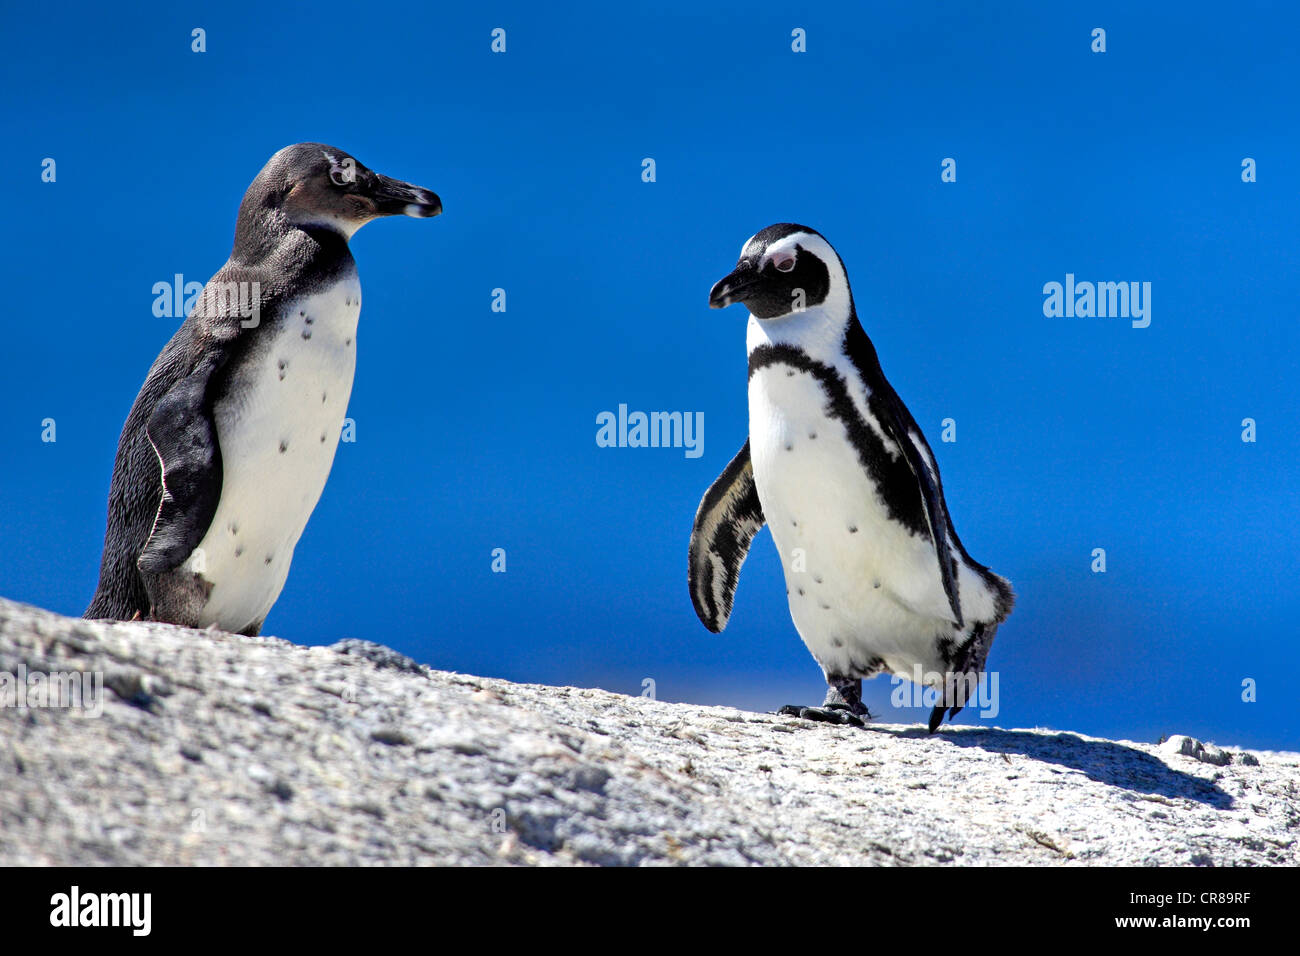 African penguin or Black-footed Penguin (Spheniscus demersus), walking, adult and immature, Boulder, Simon's Town, South Africa Stock Photo